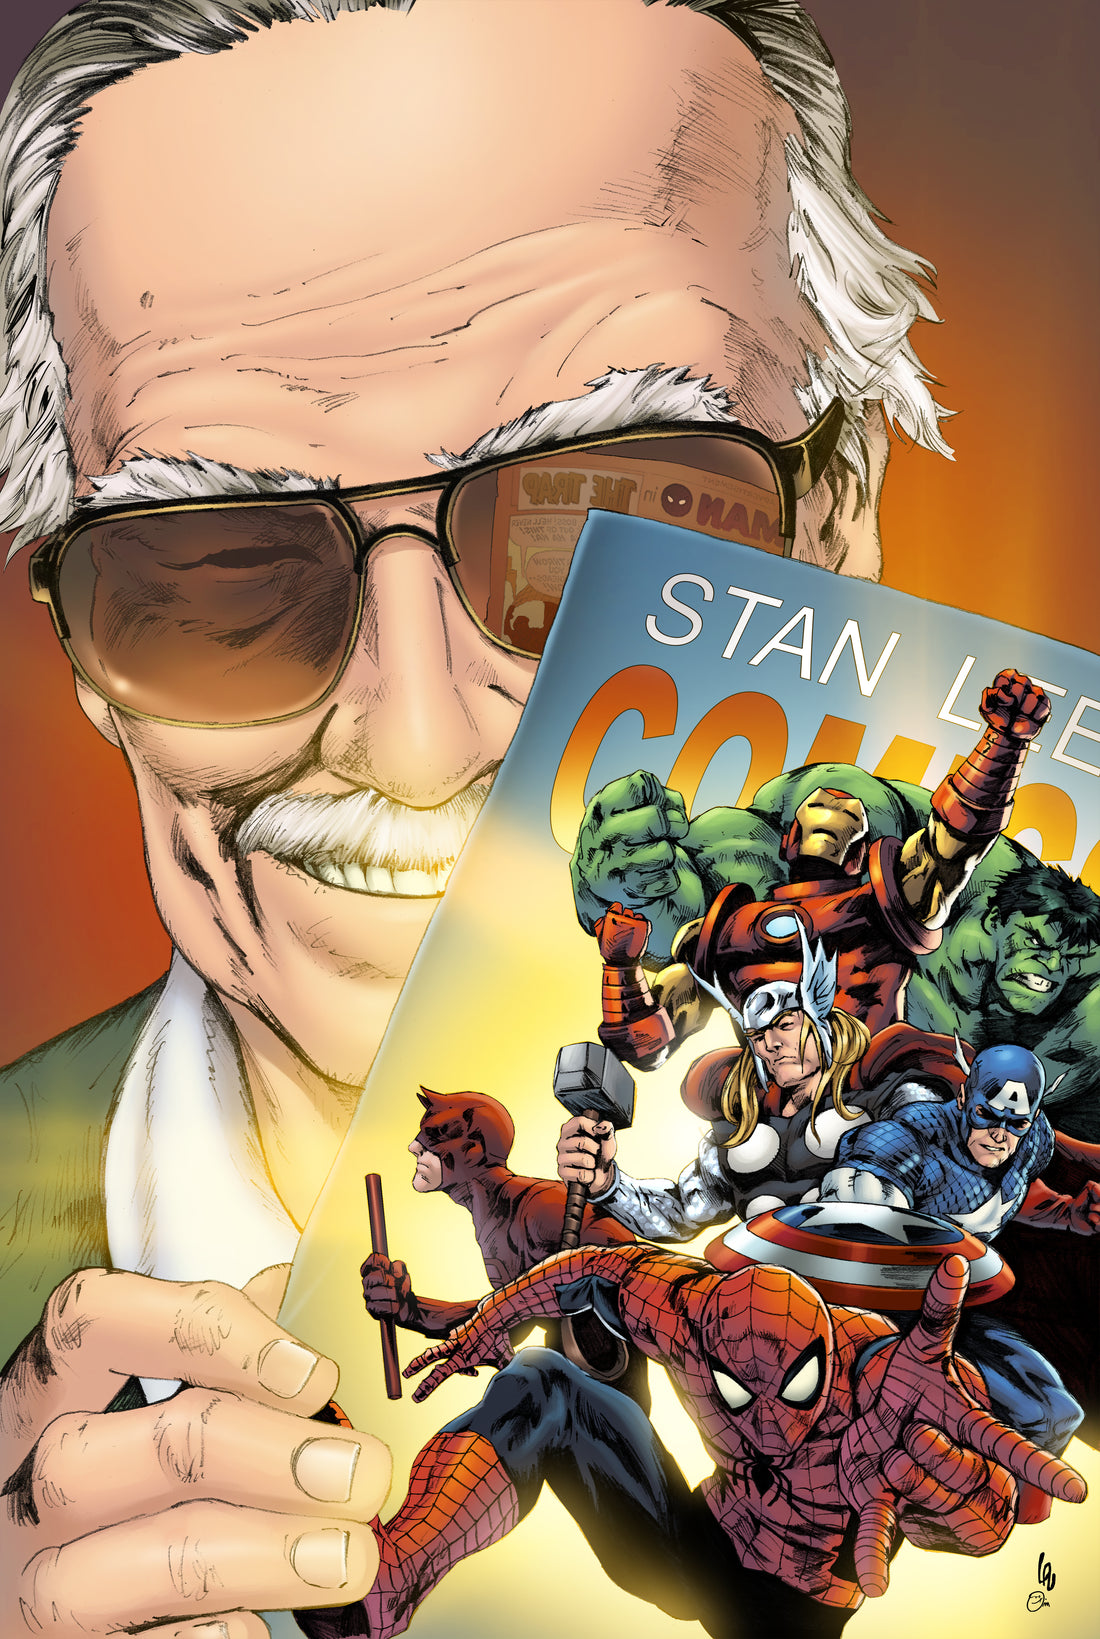 STAN LEE AND WHAT HE MEANT TO US